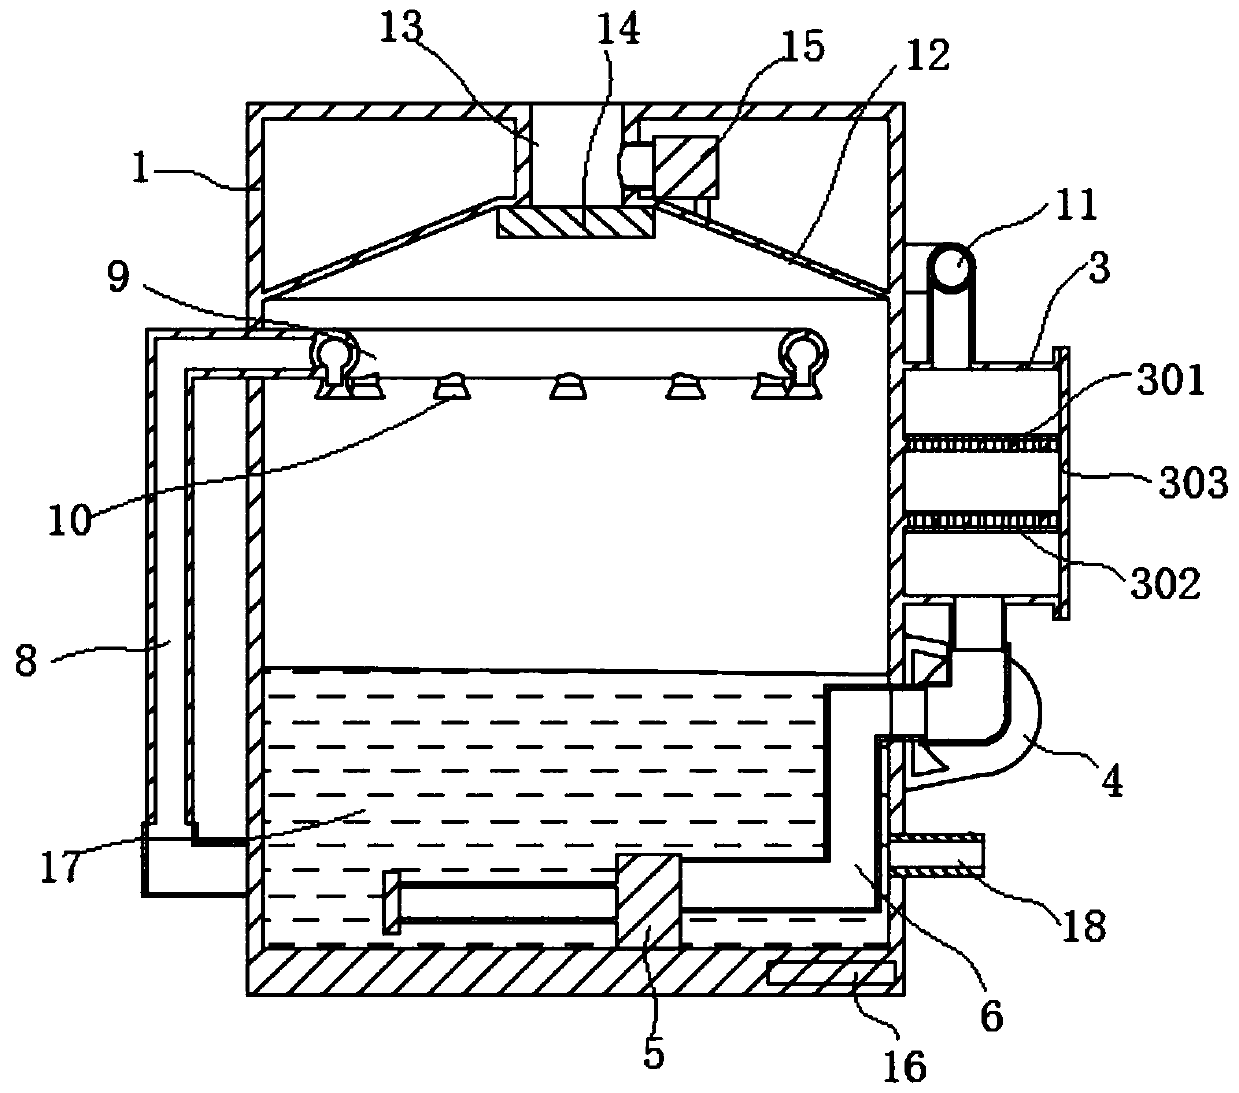 Staged air purification treatment device for workshop dusts